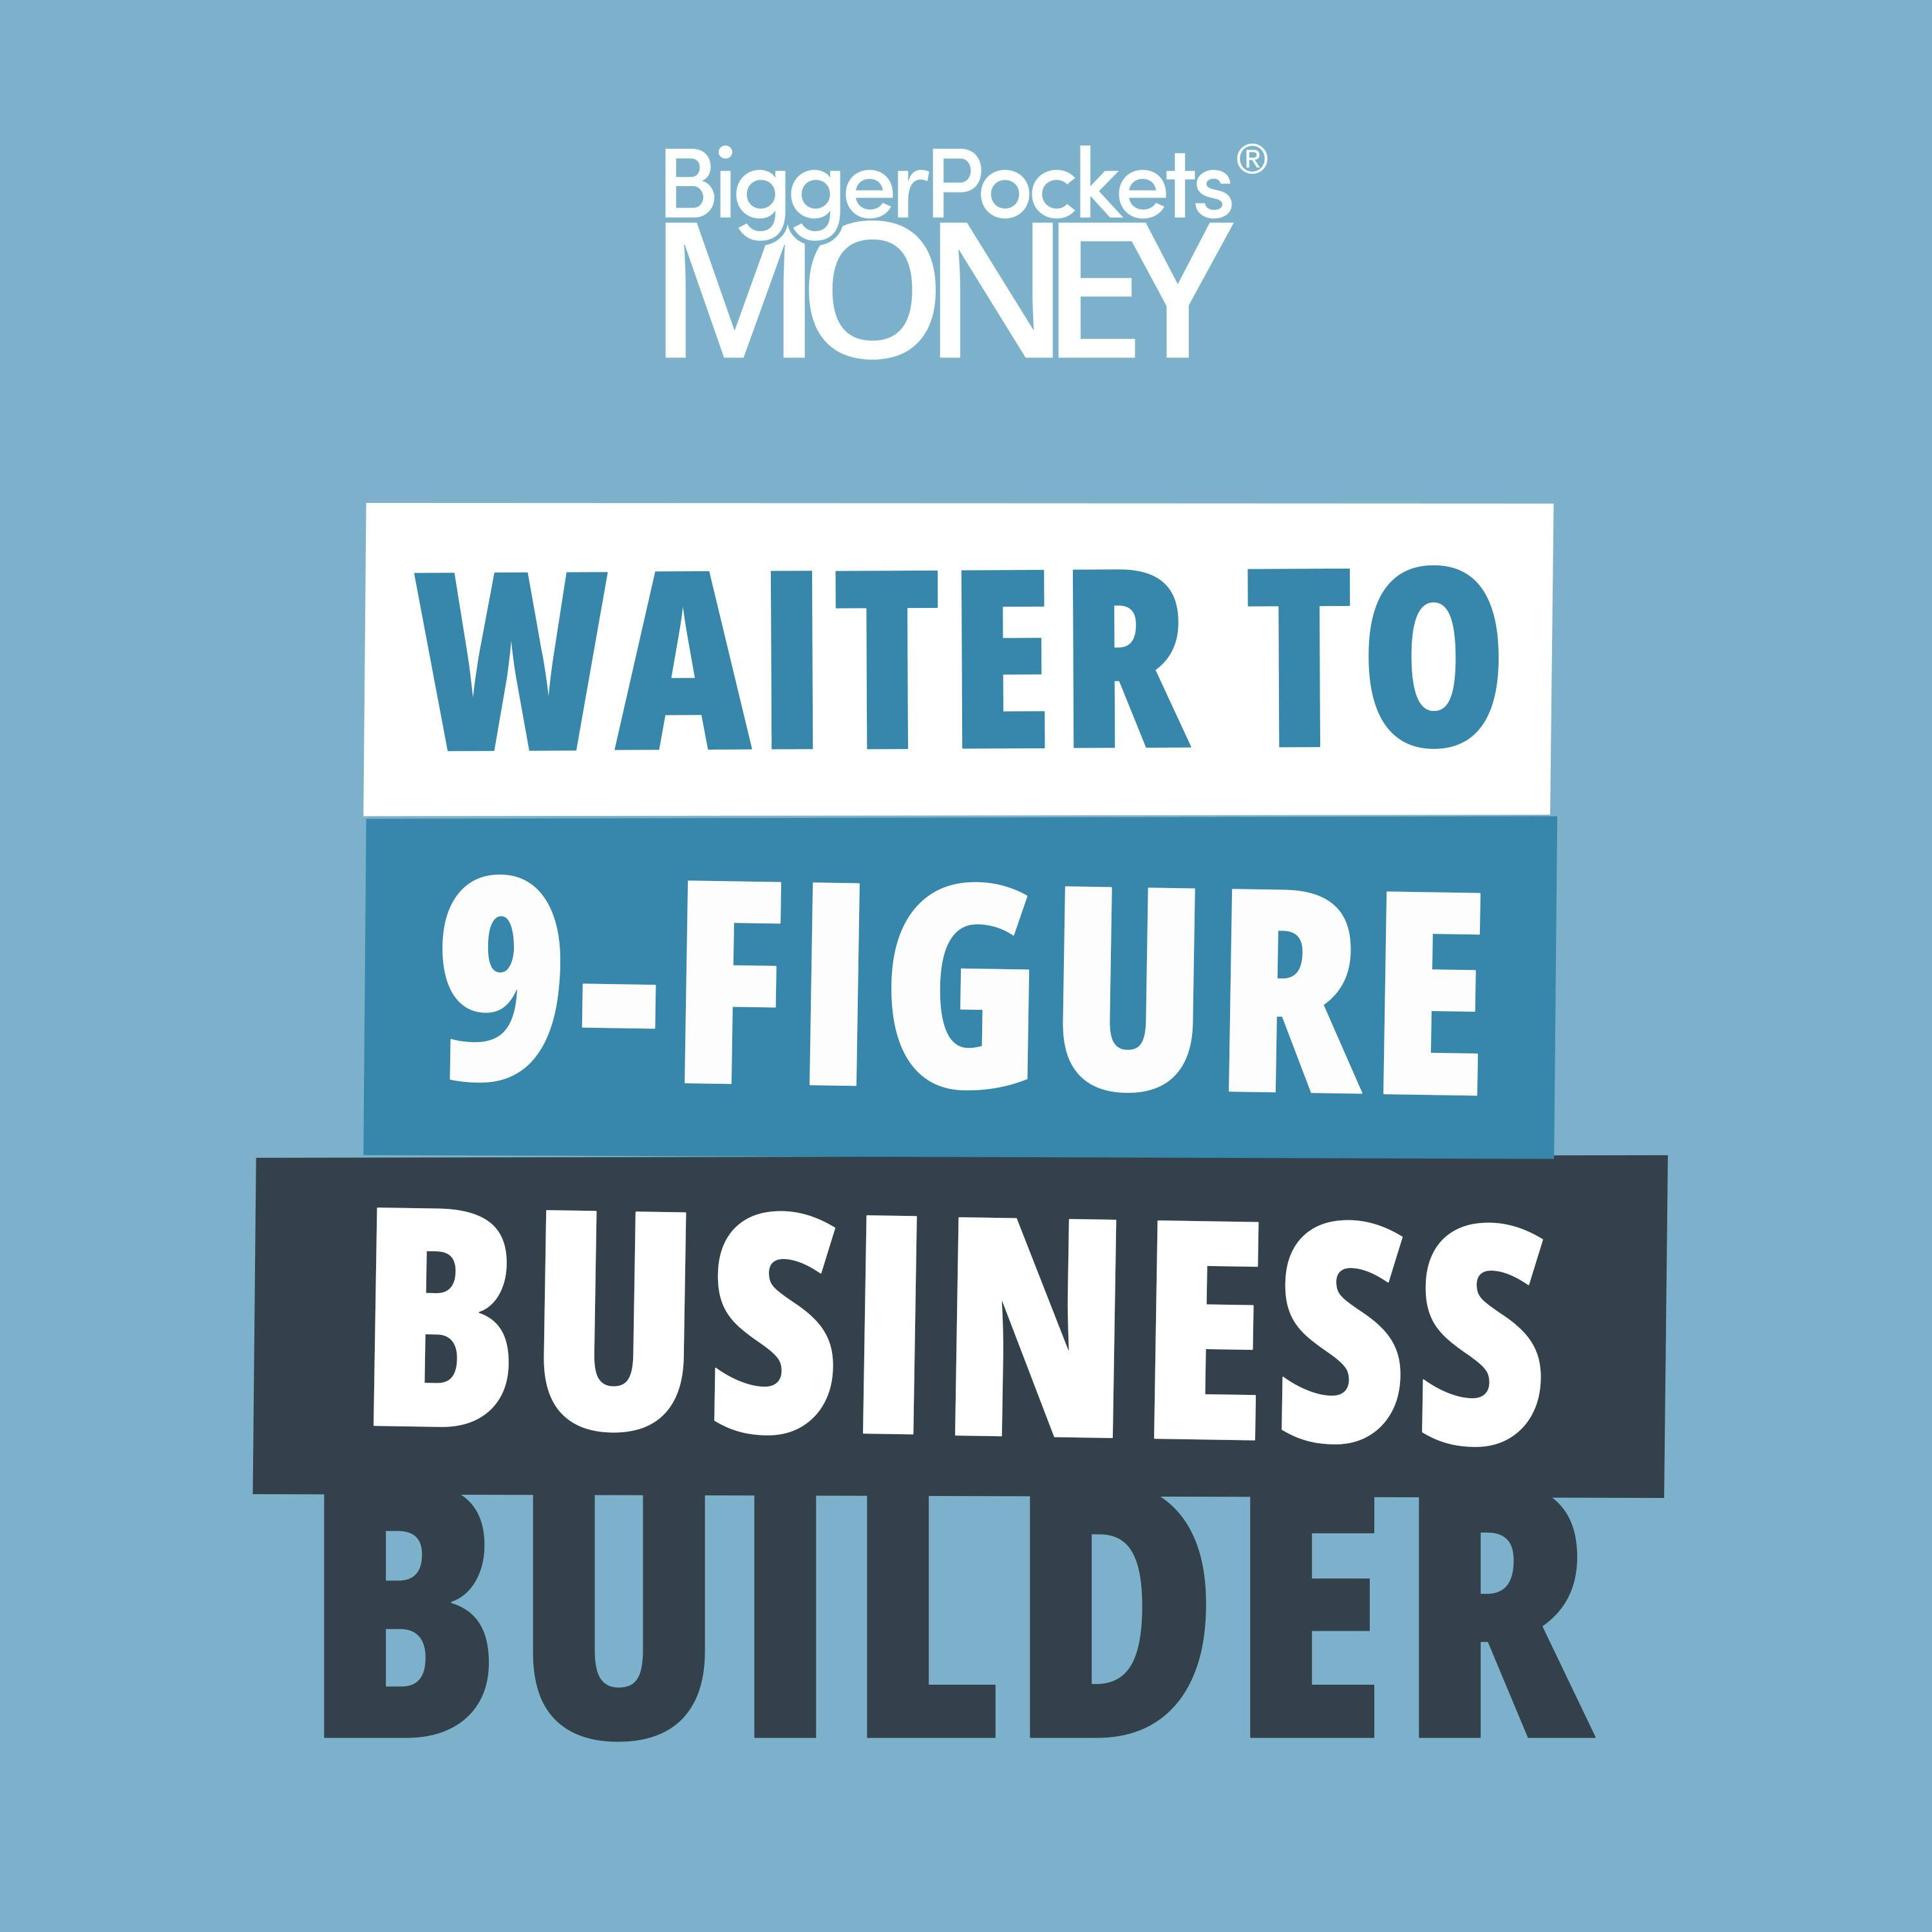 384: How Red Robin’s Waiter of the Year Built MULTIPLE 9-Figure Businesses